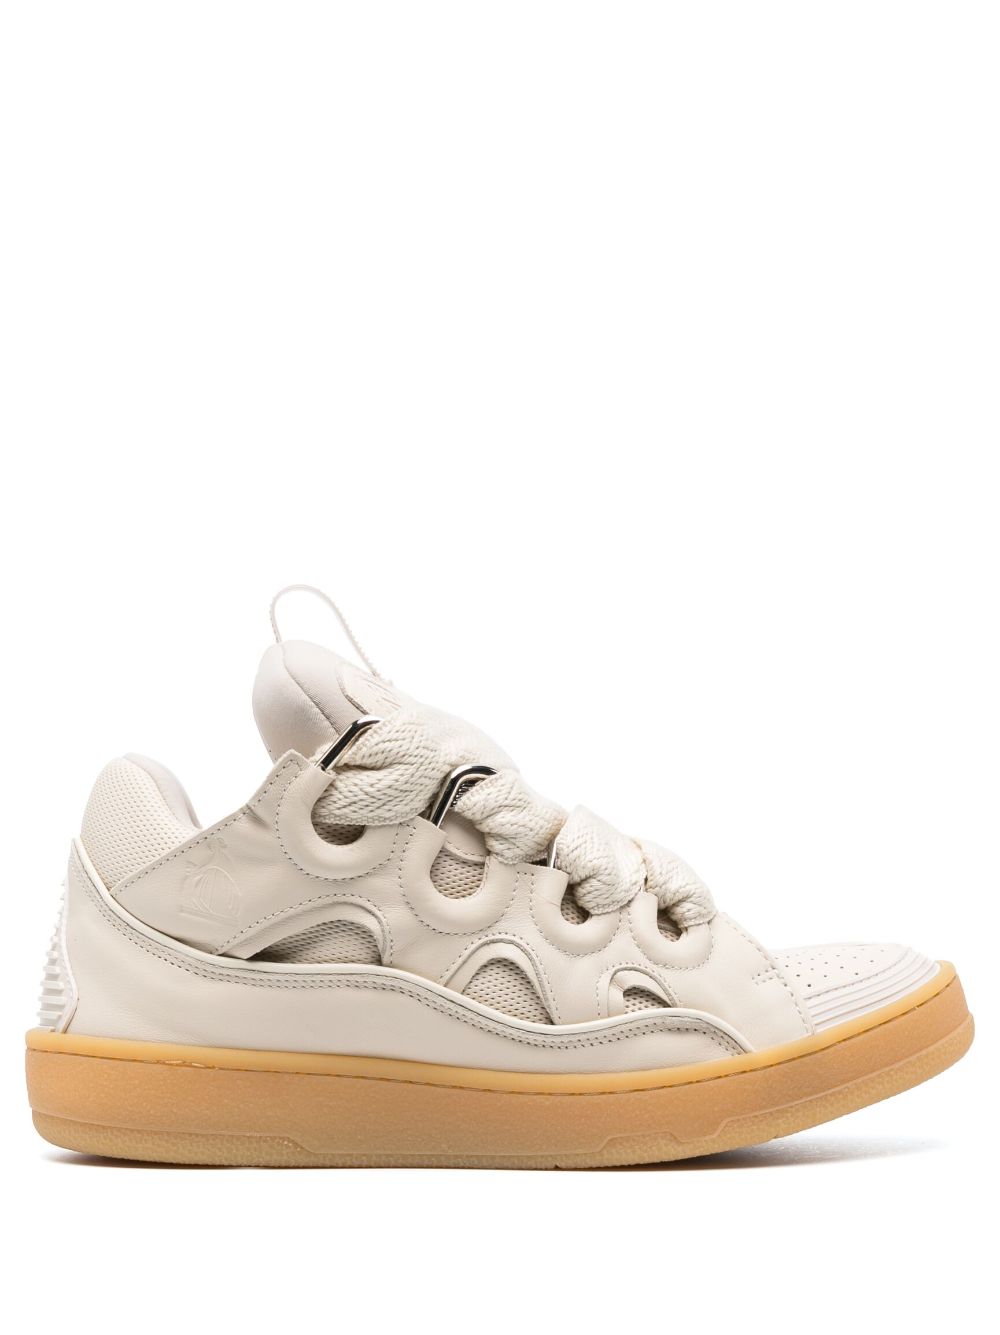 Lanvin Curb Leather Sneakers In Neutrals